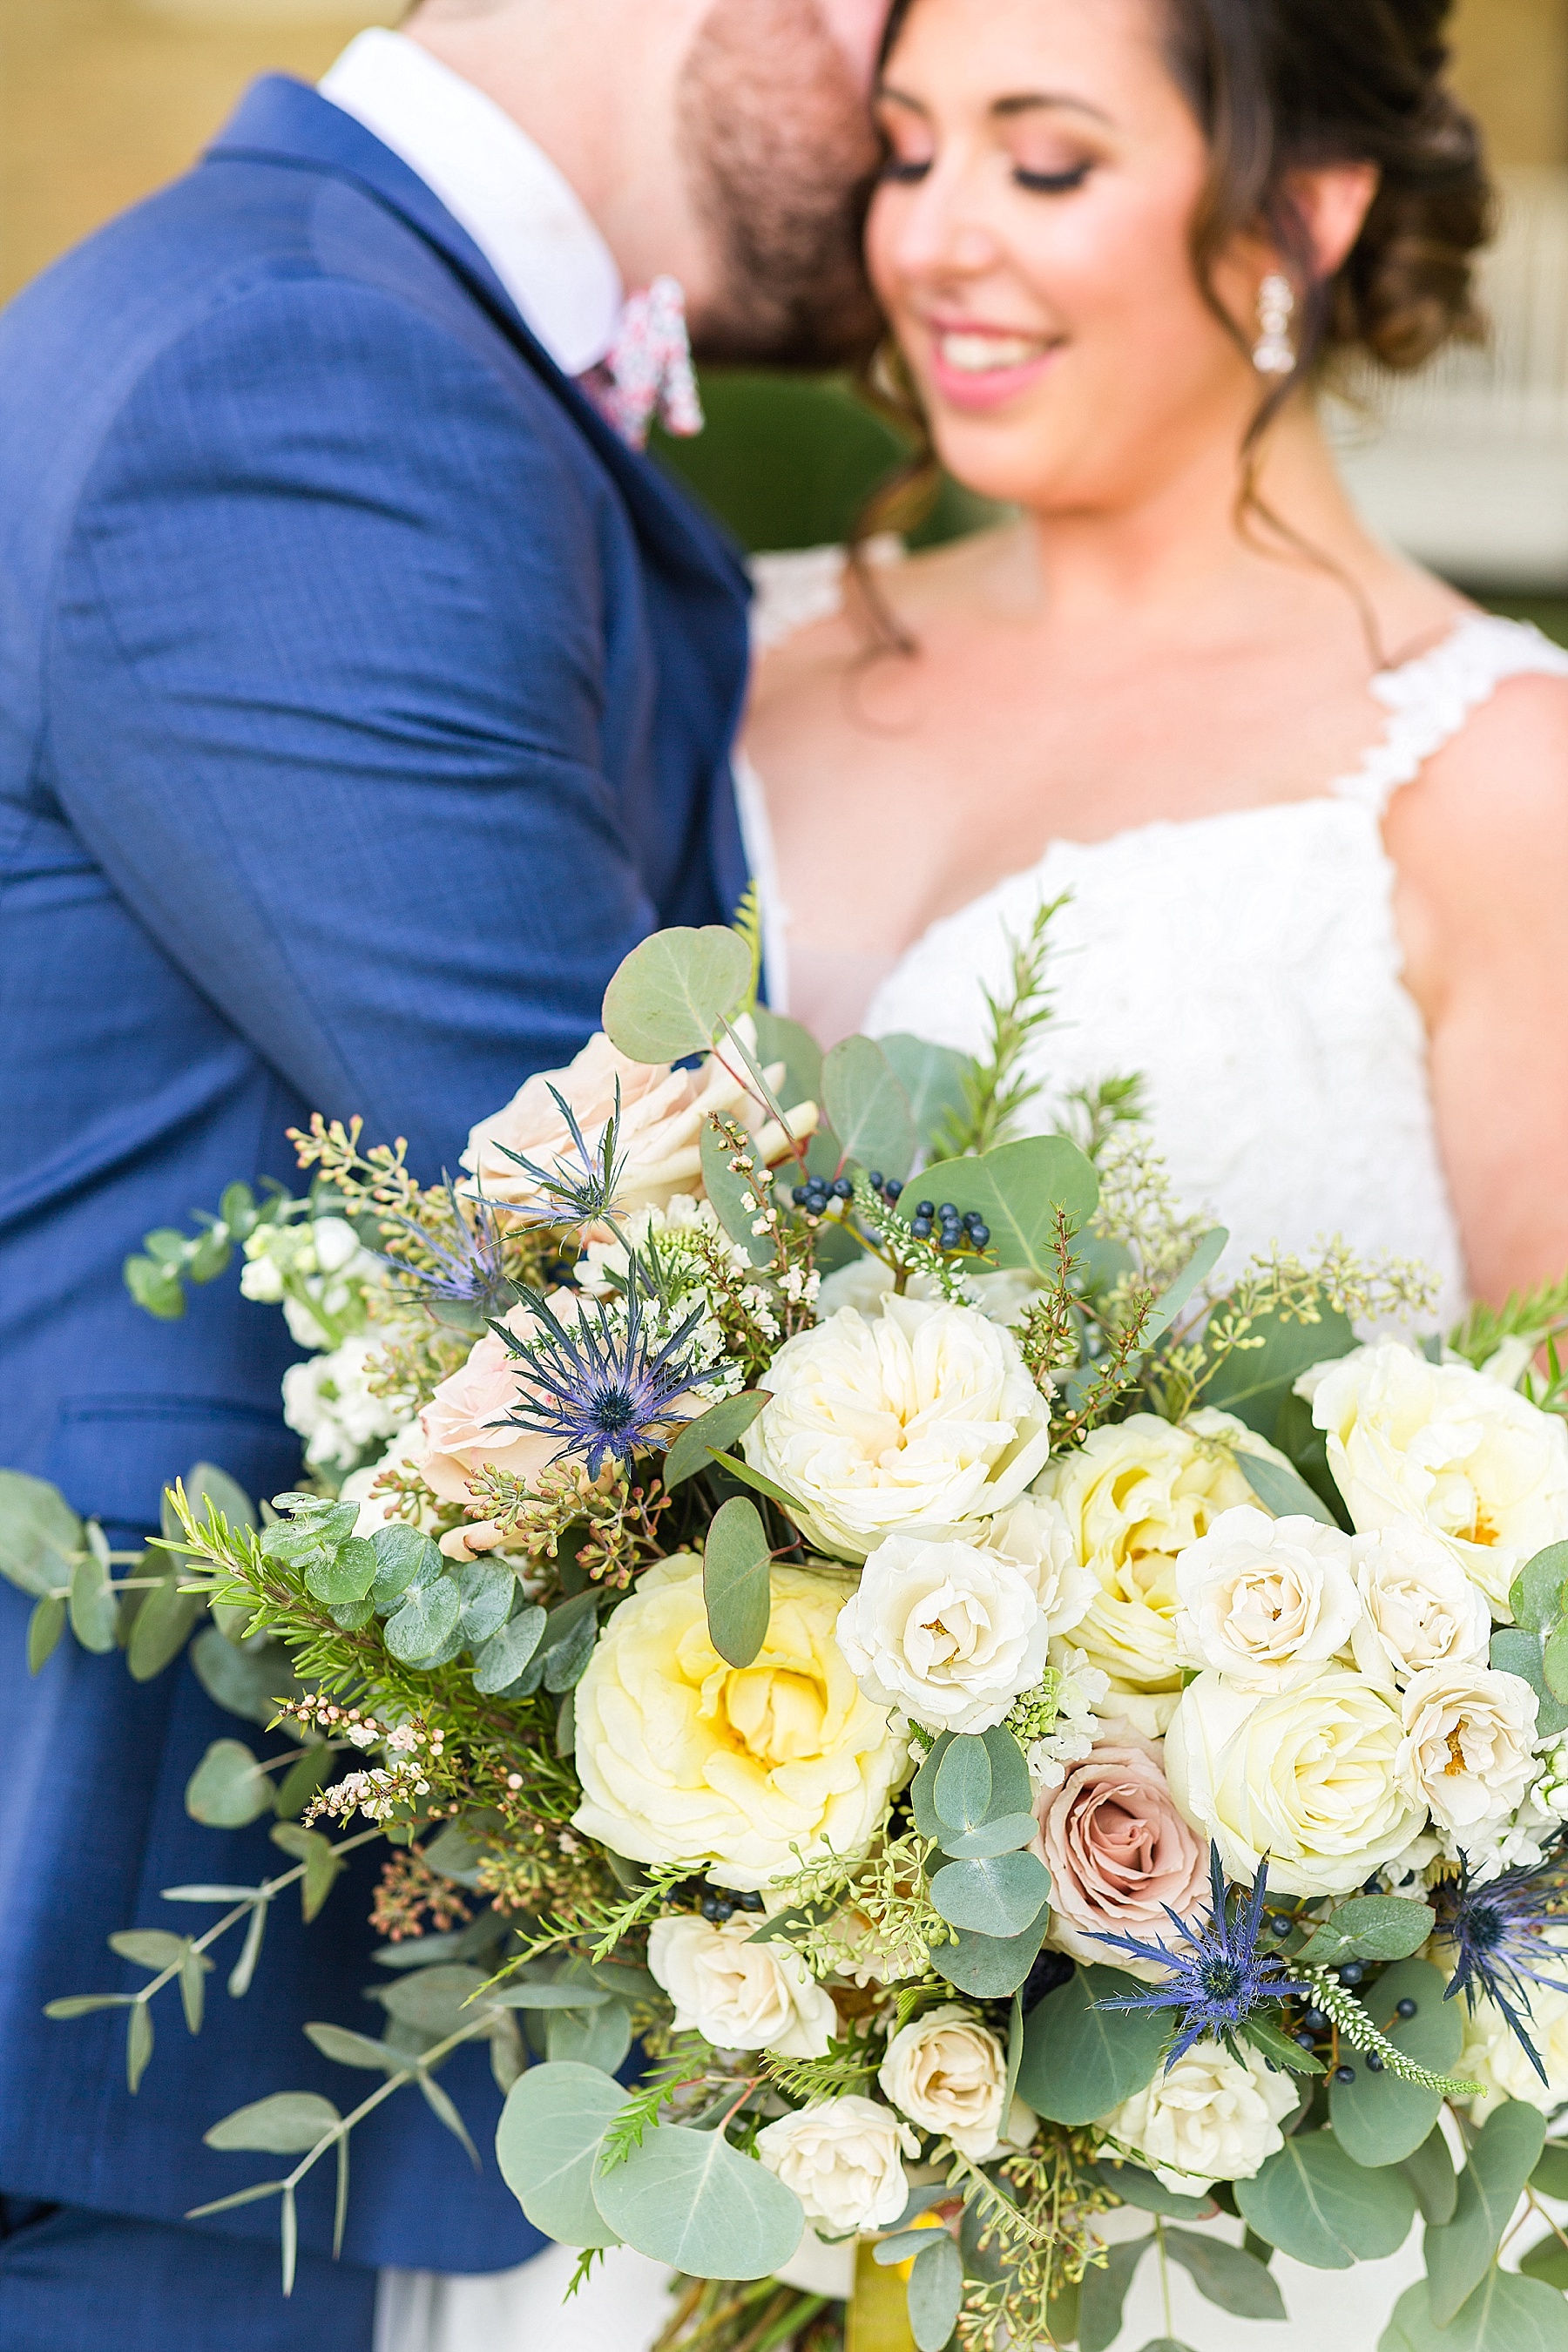 wedding bouquet by Moss + vine Event Designs photographed by Alexandra Mandato Photography